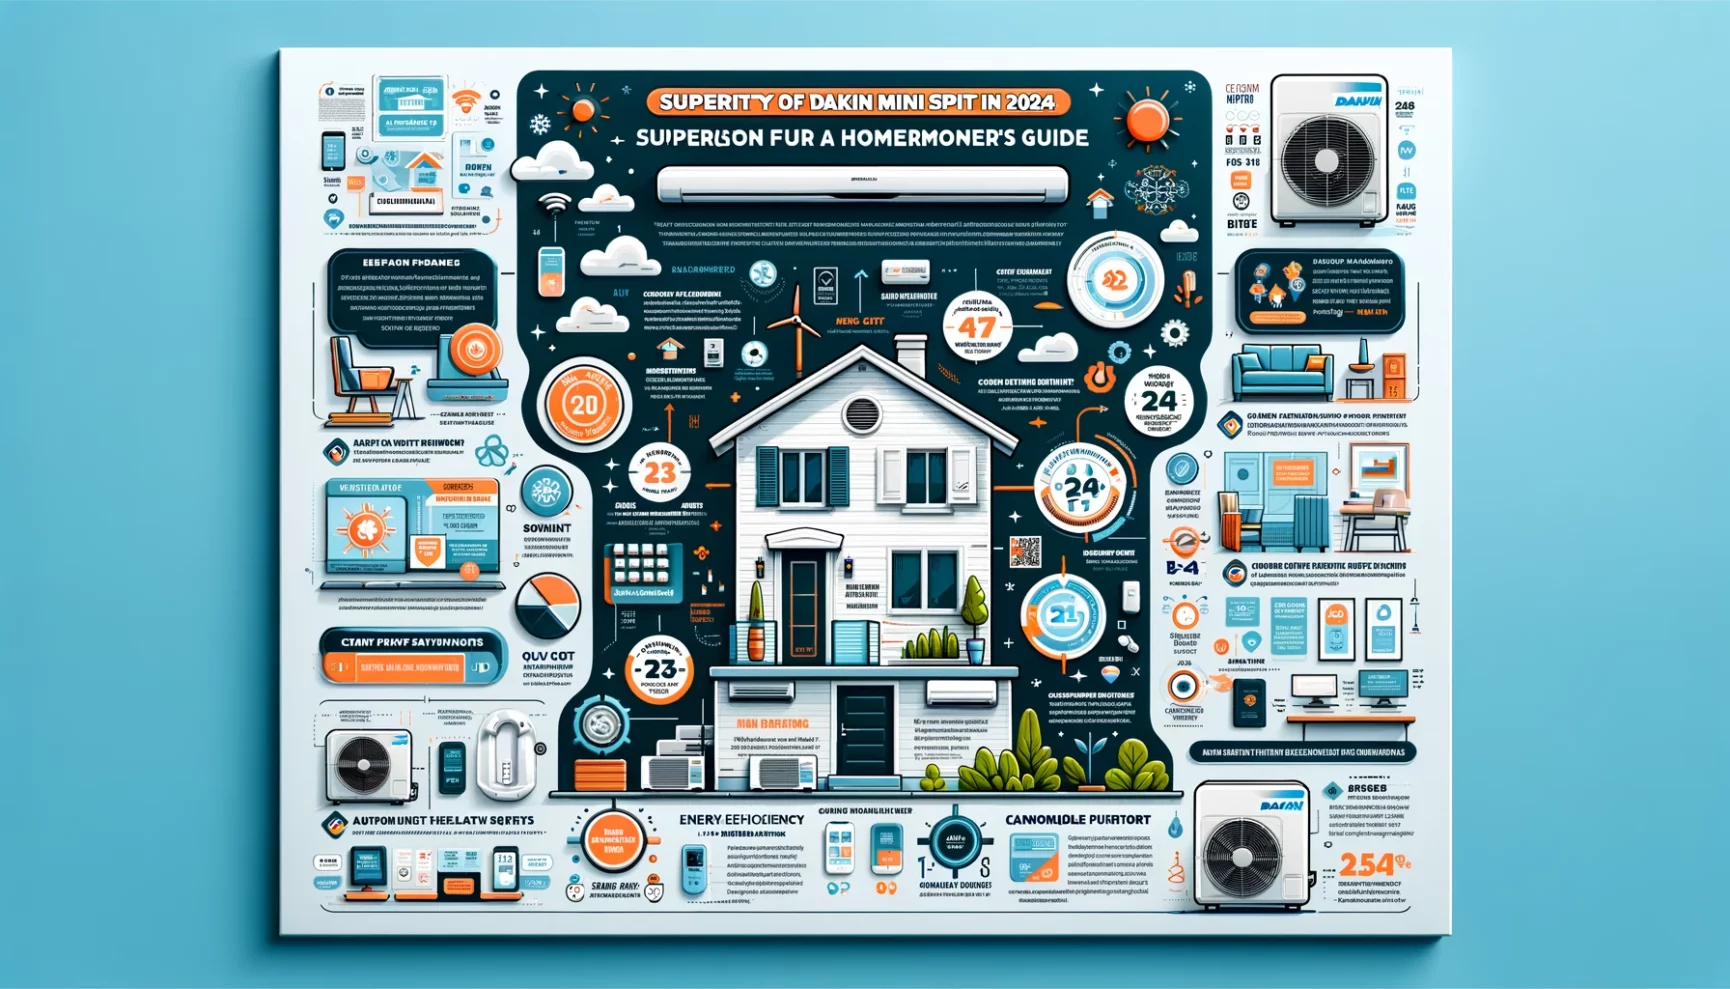 An infographic poster detailing a "superison fura homeowner's guide" with various statistics, smart home devices, and energy-efficient solutions.